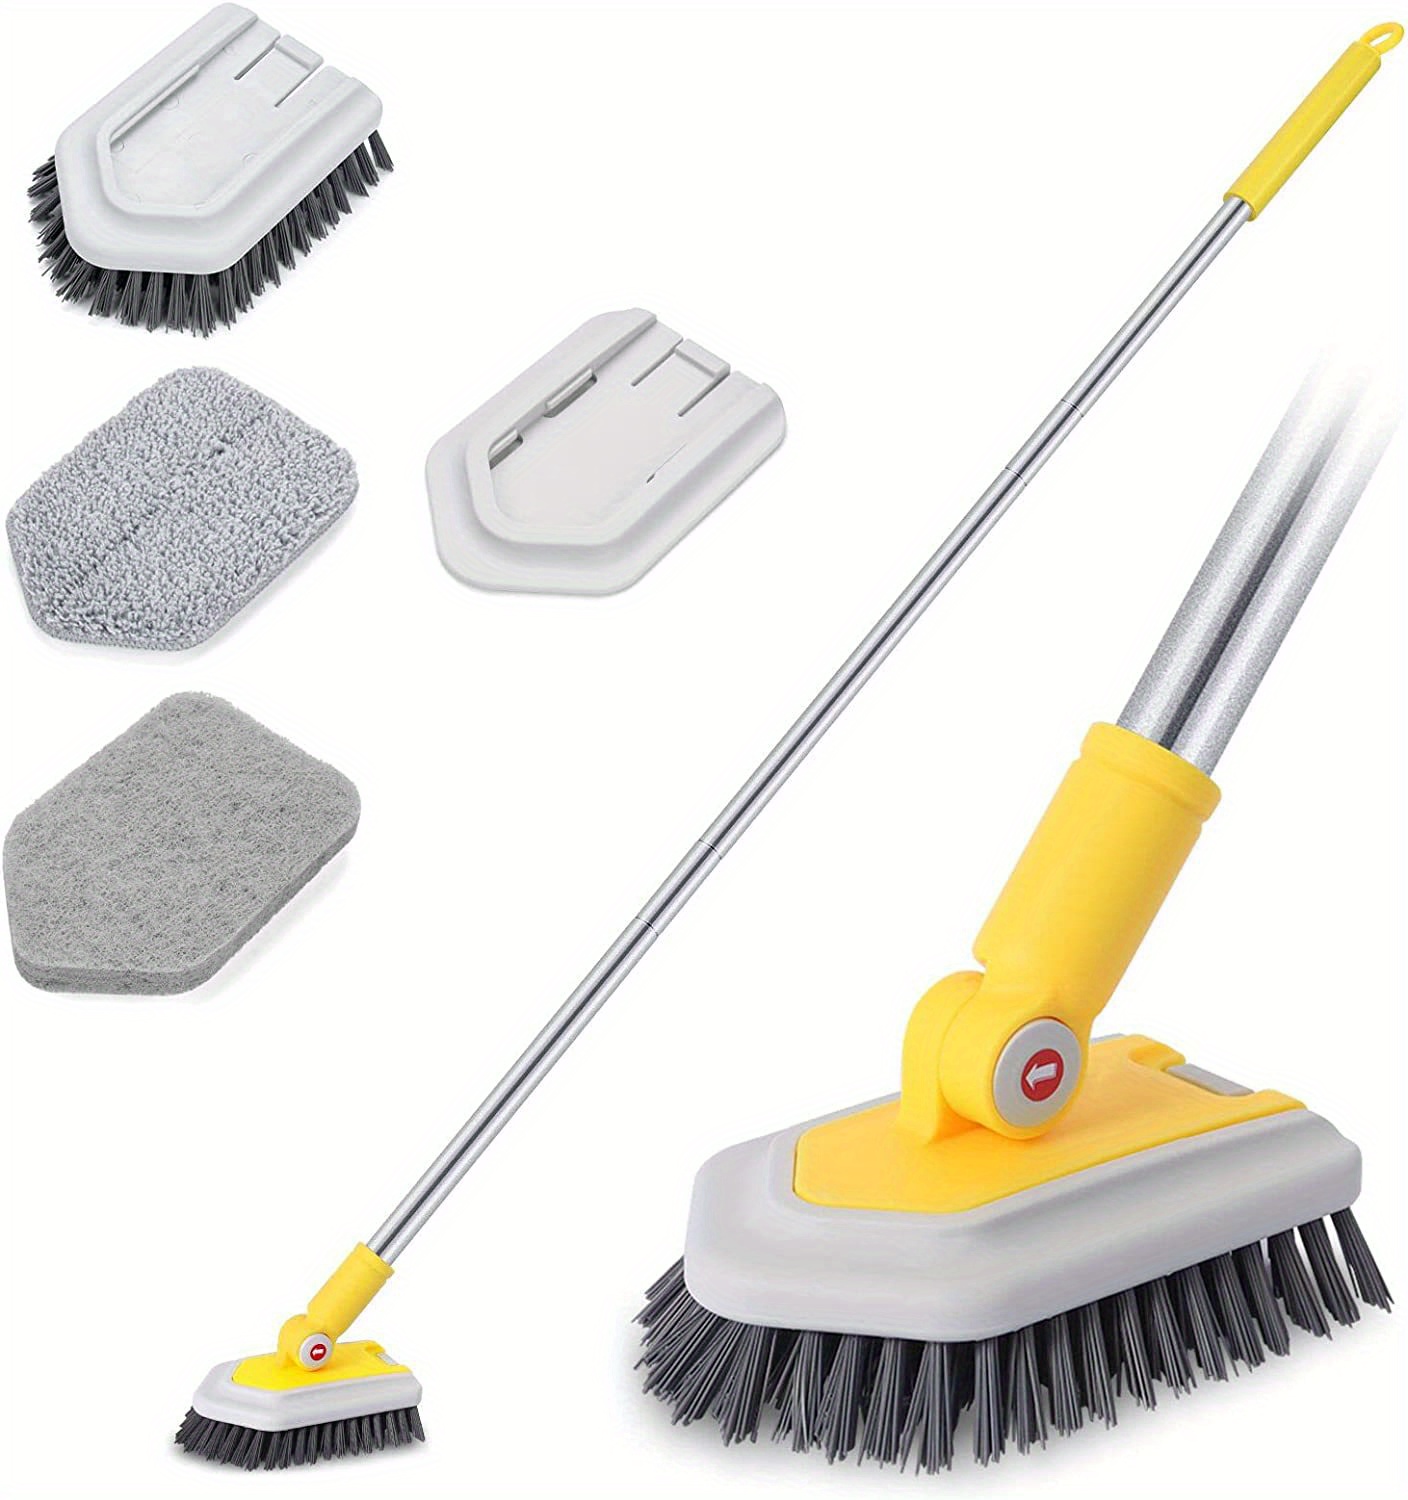 Scrub Cleaning Brush with Long Handle 2 in 1 Extendable Bathroom Floor  Brushes with 2 Stiff Bristles and 4 Sponge Brush with Long Handle  Detachable